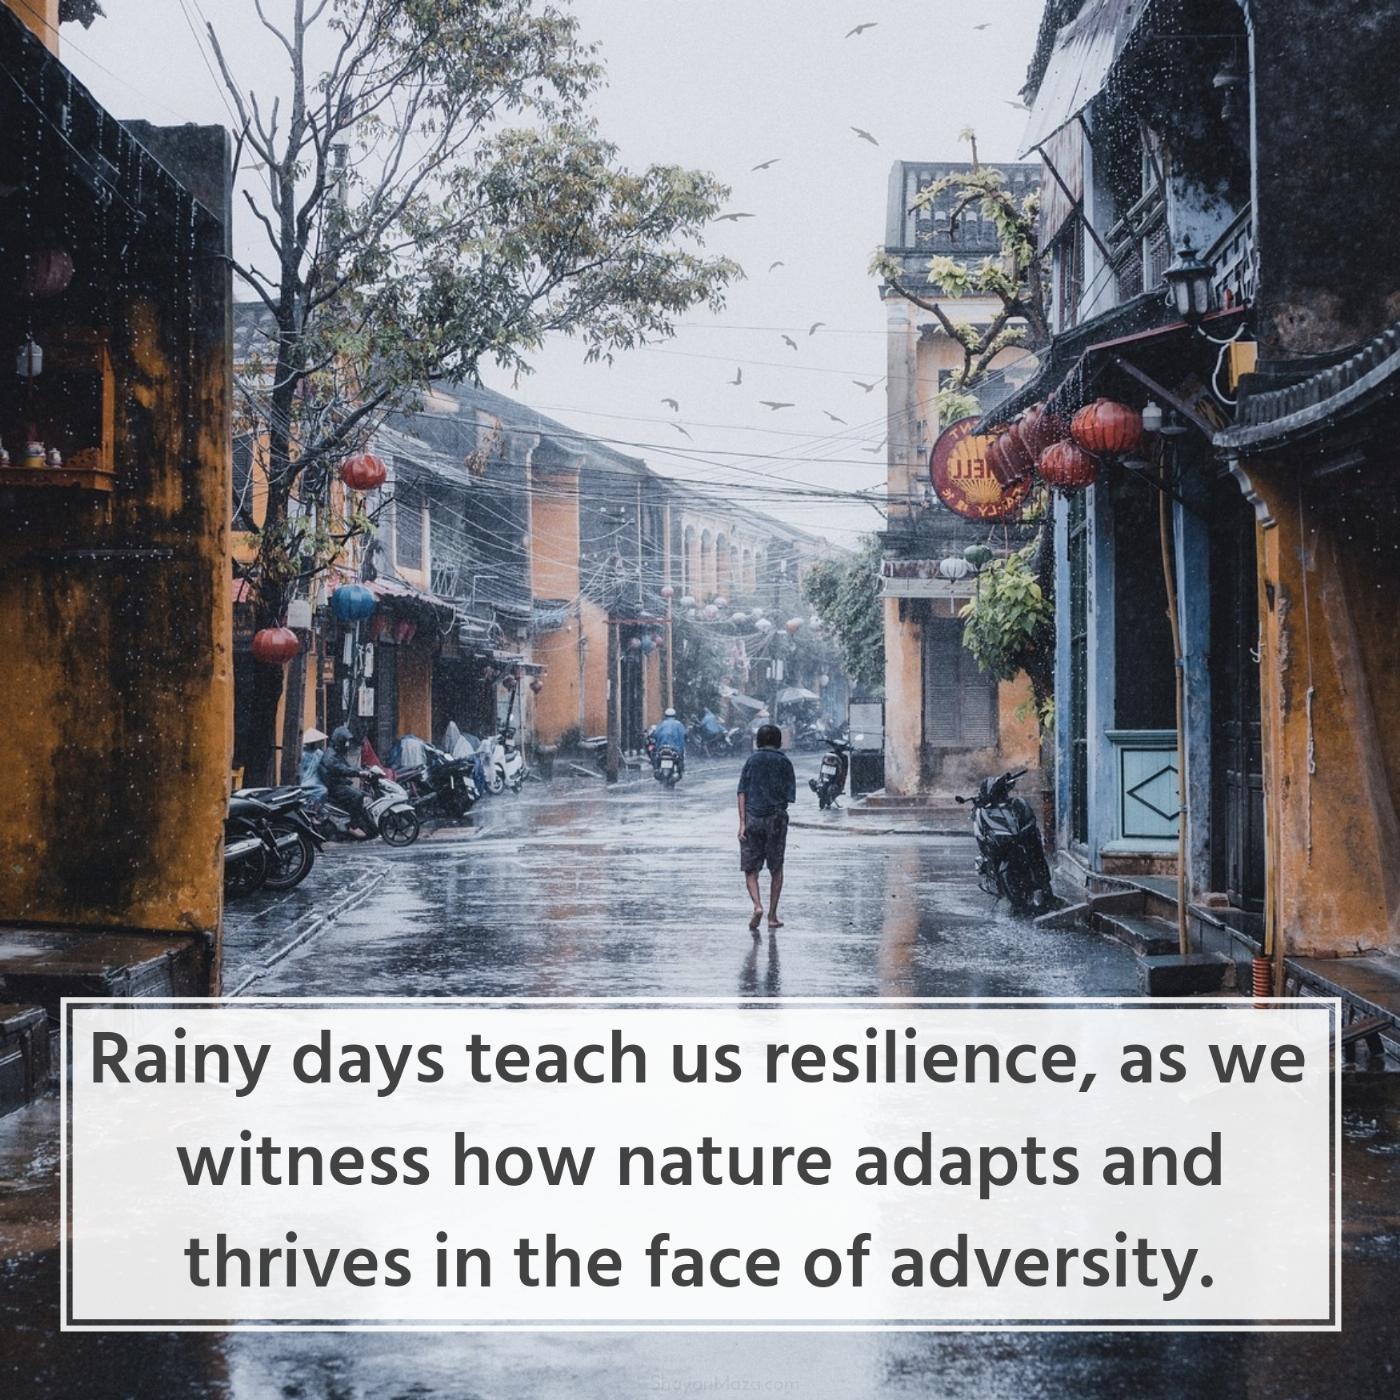 Rainy days teach us resilience as we witness how nature adapts